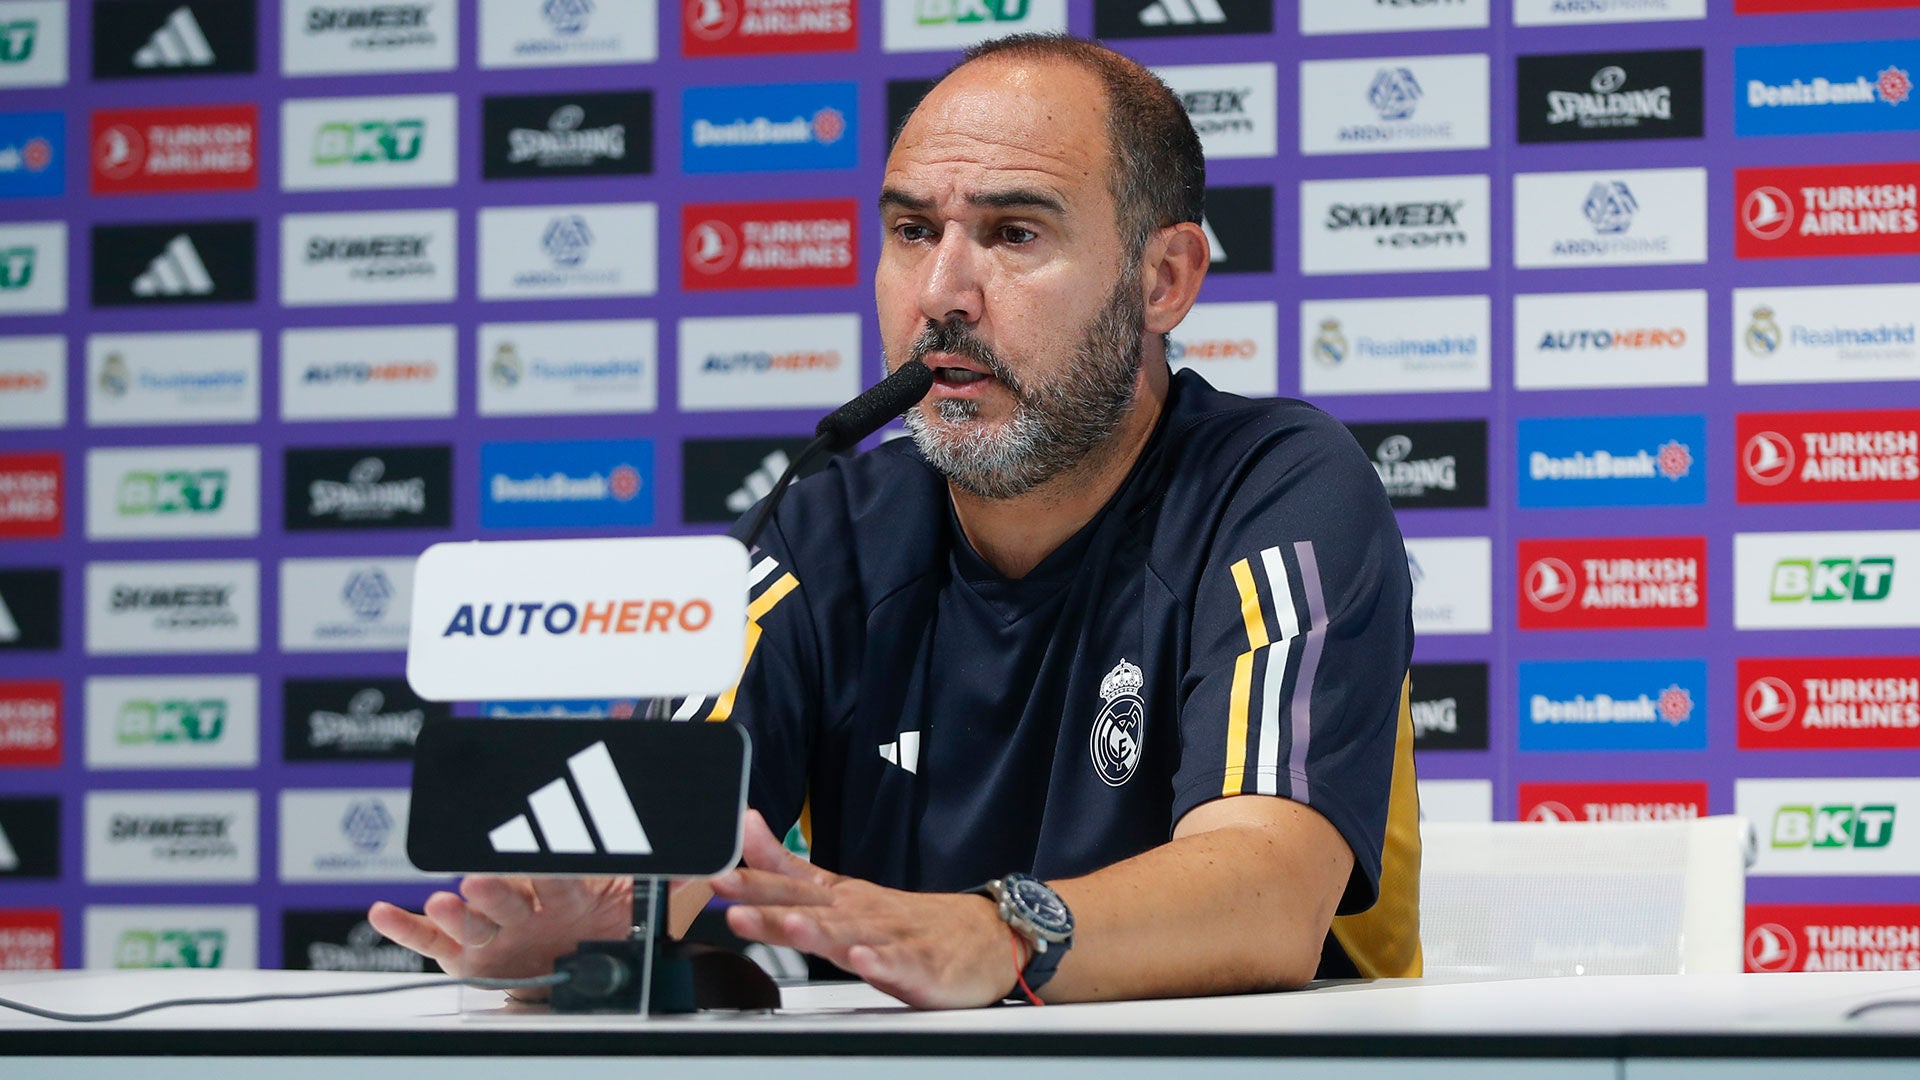 Chus Mateo: “We have to be focused and approach the game with a good mentality”